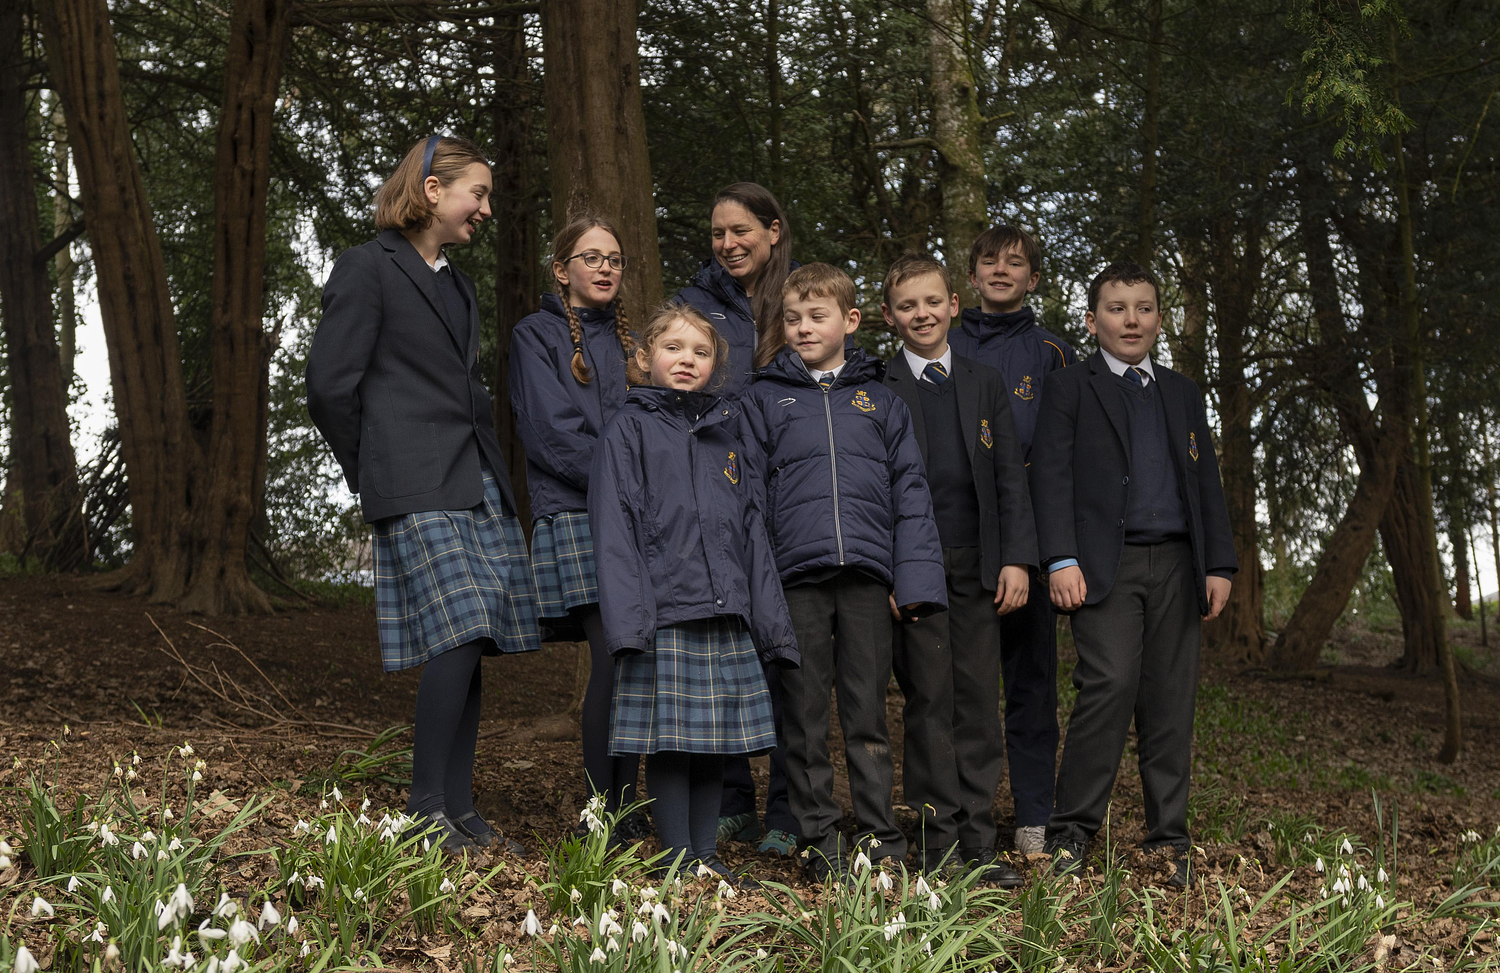 Meet the pupils creating a buzz about sustainable change 